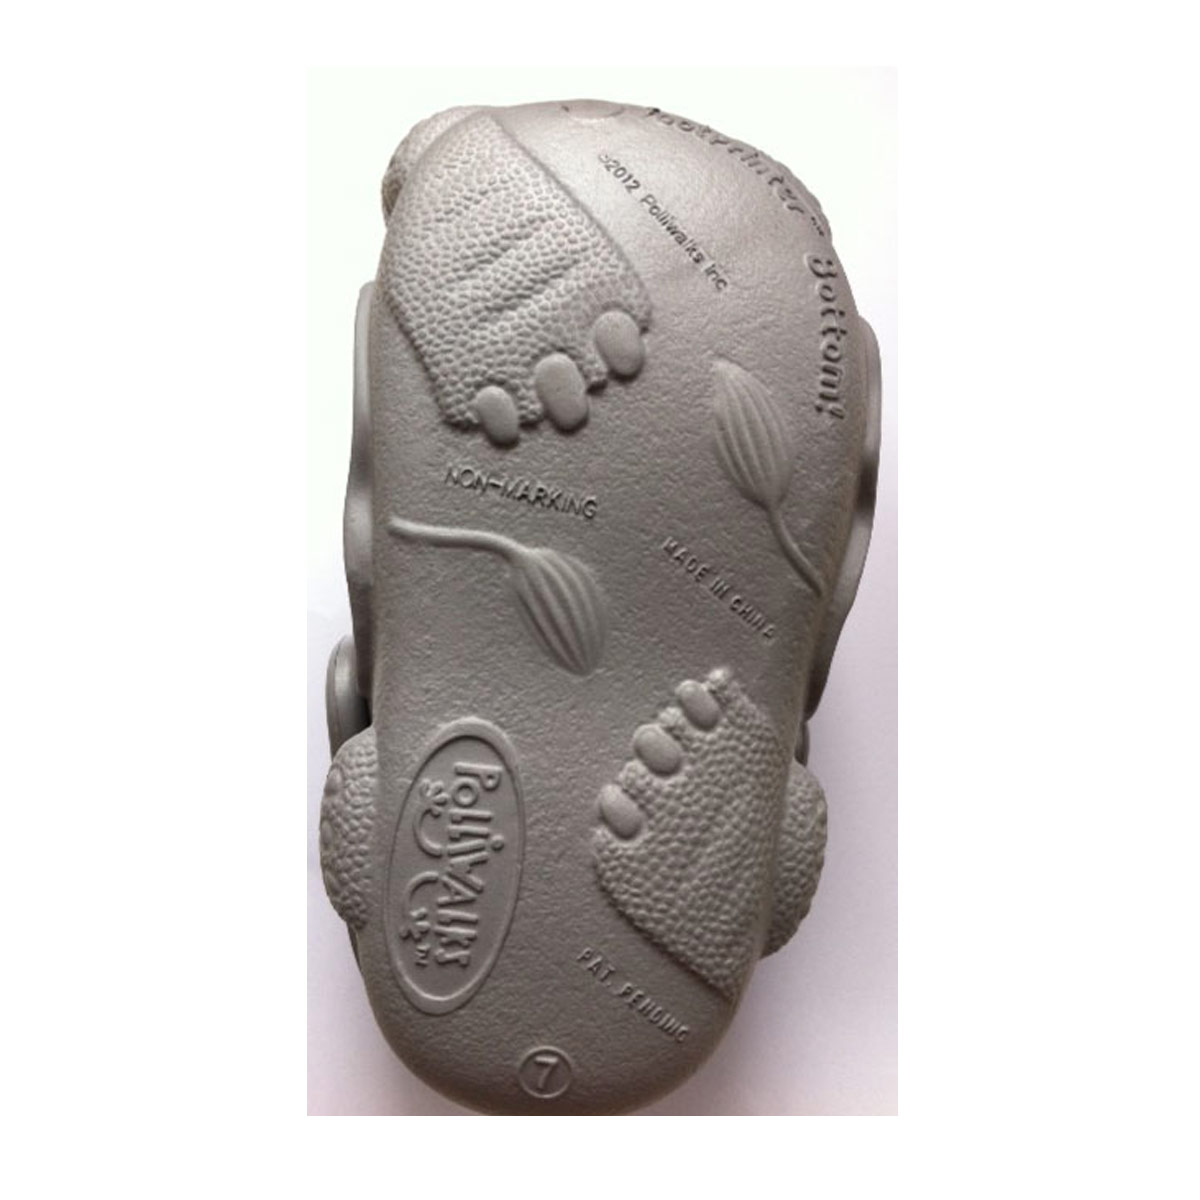 Polliwalks : Toddler shoes Ethan the ELEPHANT Gray # 7